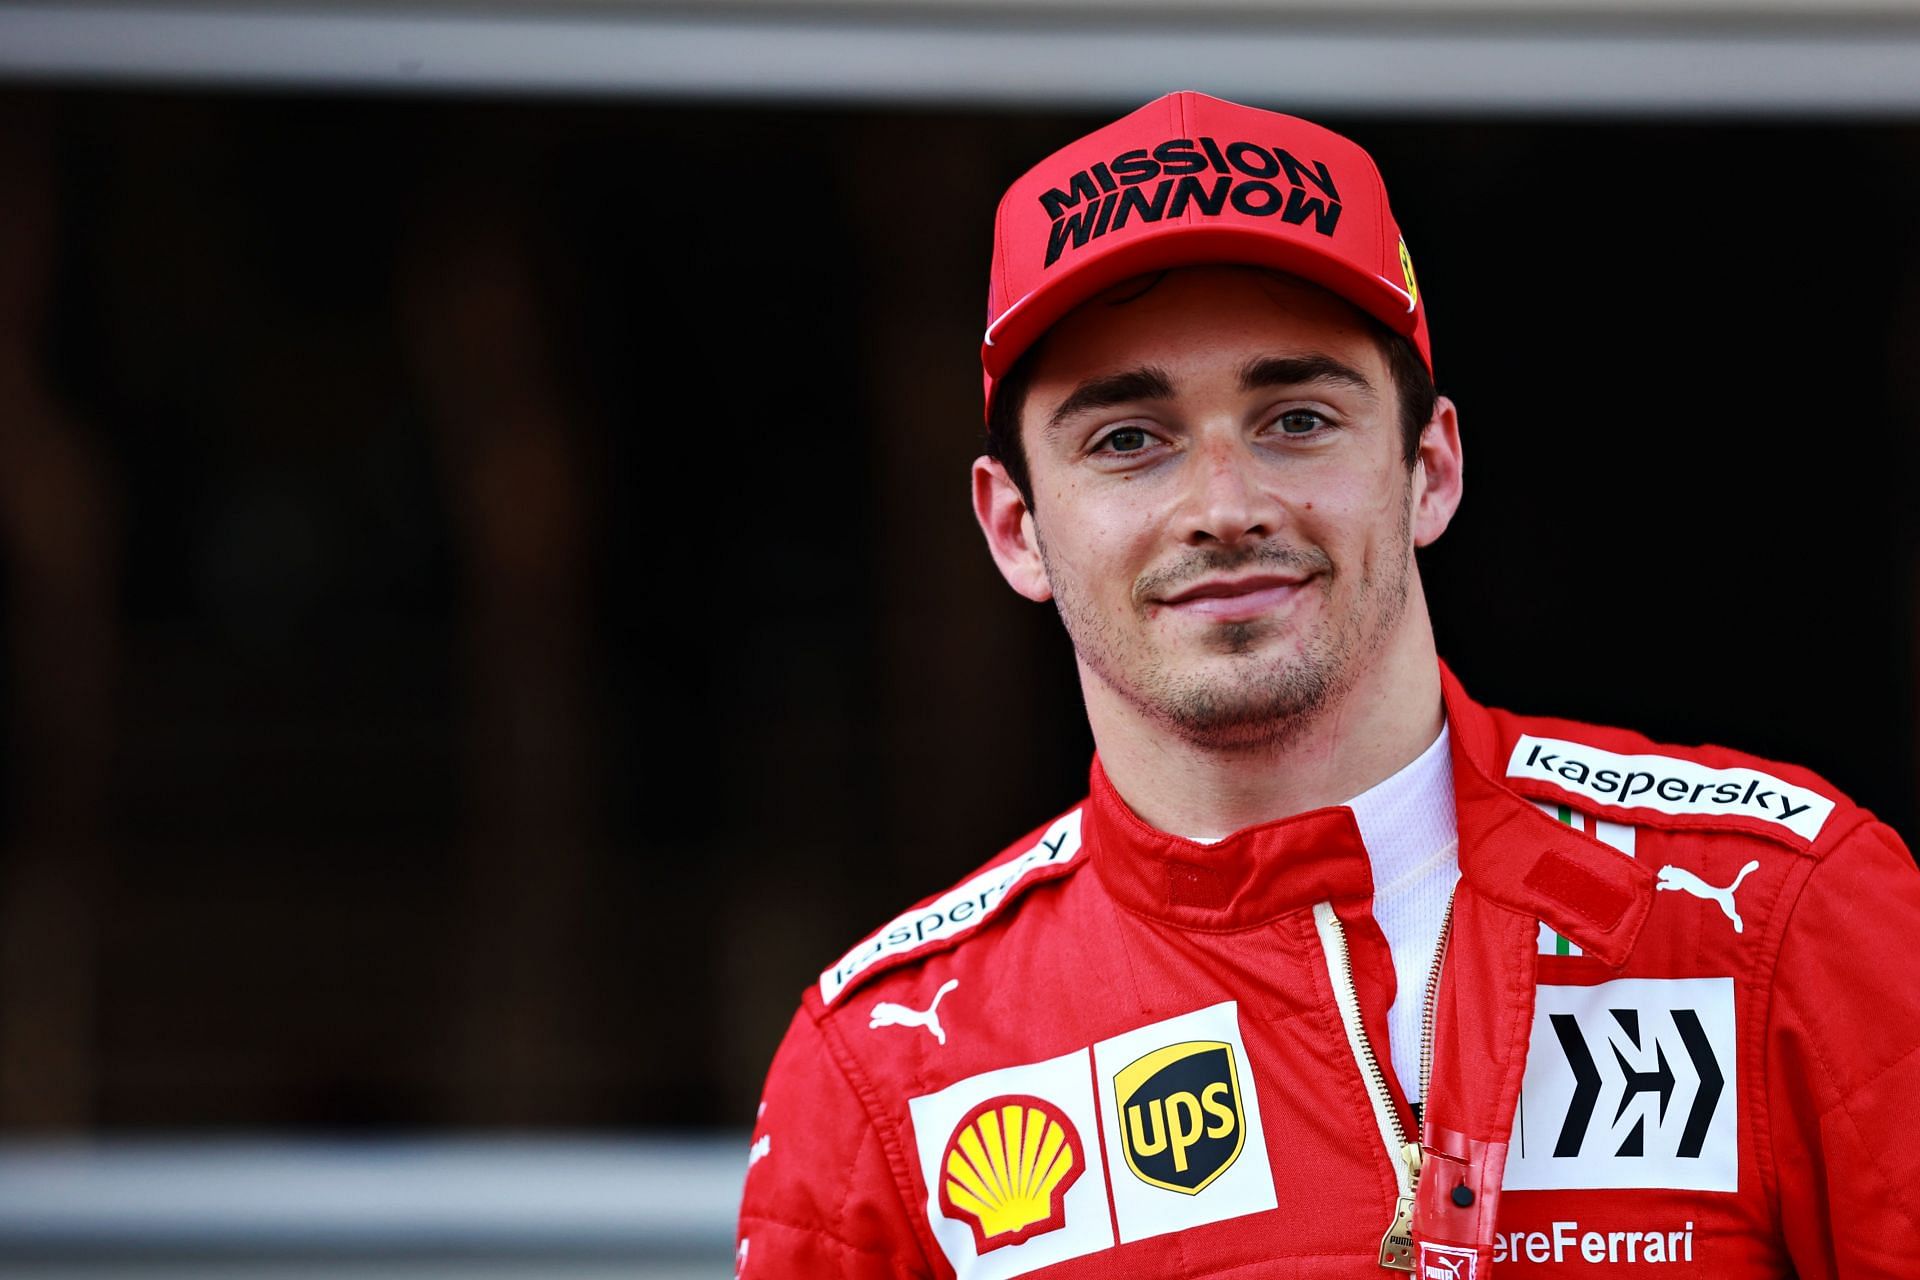 Charles Leclerc secured his eighth career pole position at the 2021 Monaco Grand Prix but failed to start the race come Sunday